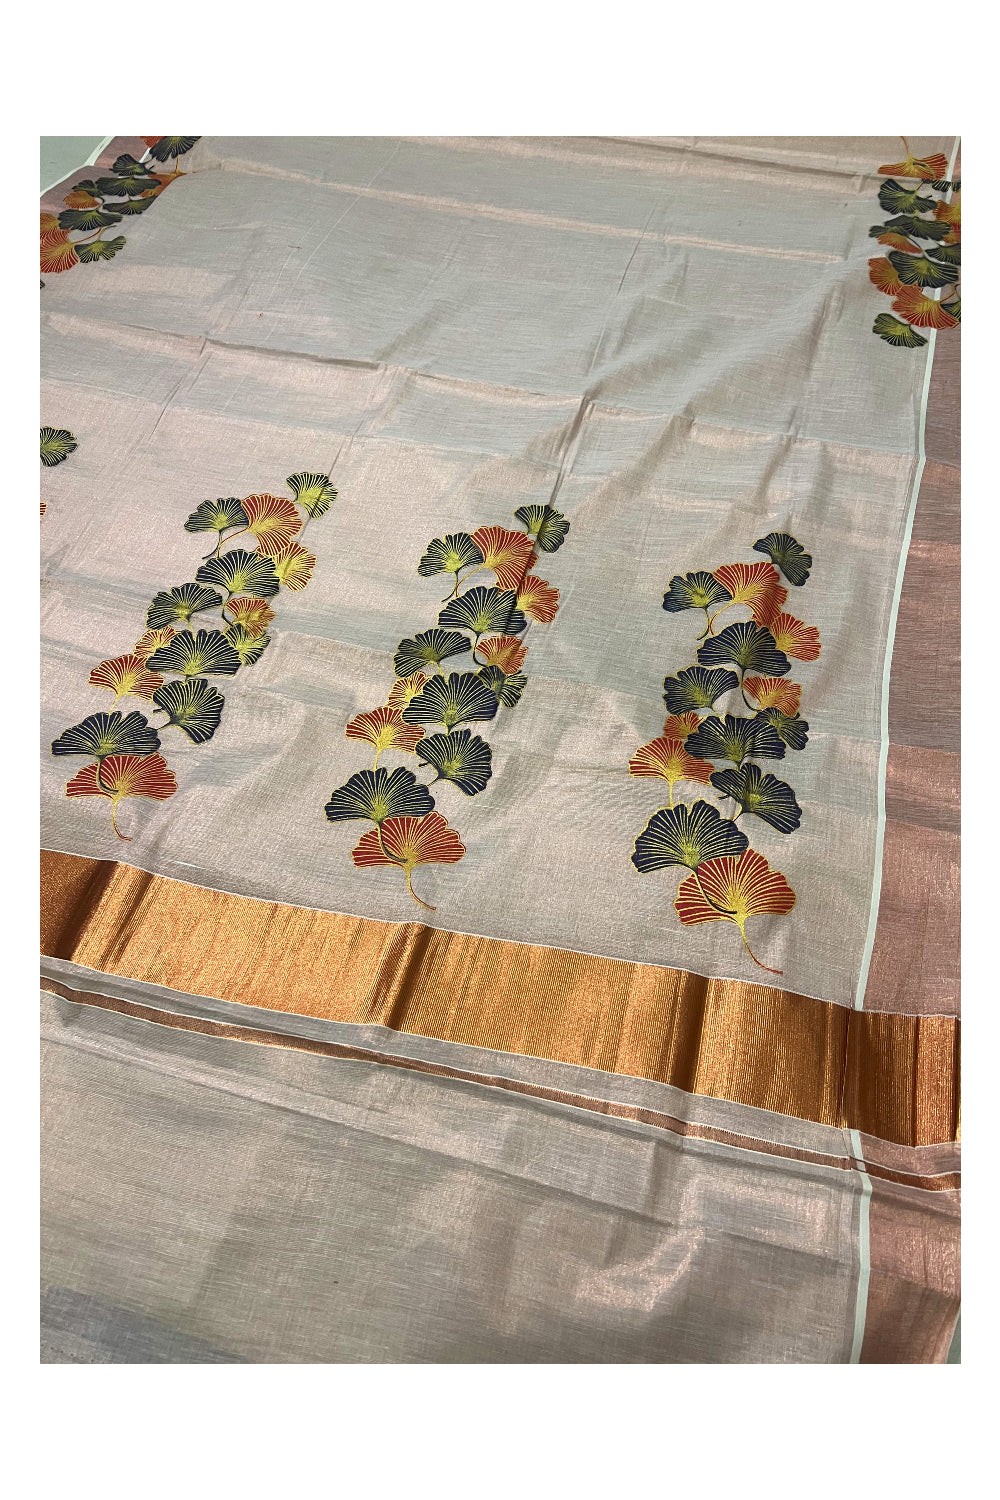 Kerala Copper Tissue Kasavu Saree With Mural Printed Dark Blue and Red Floral Design